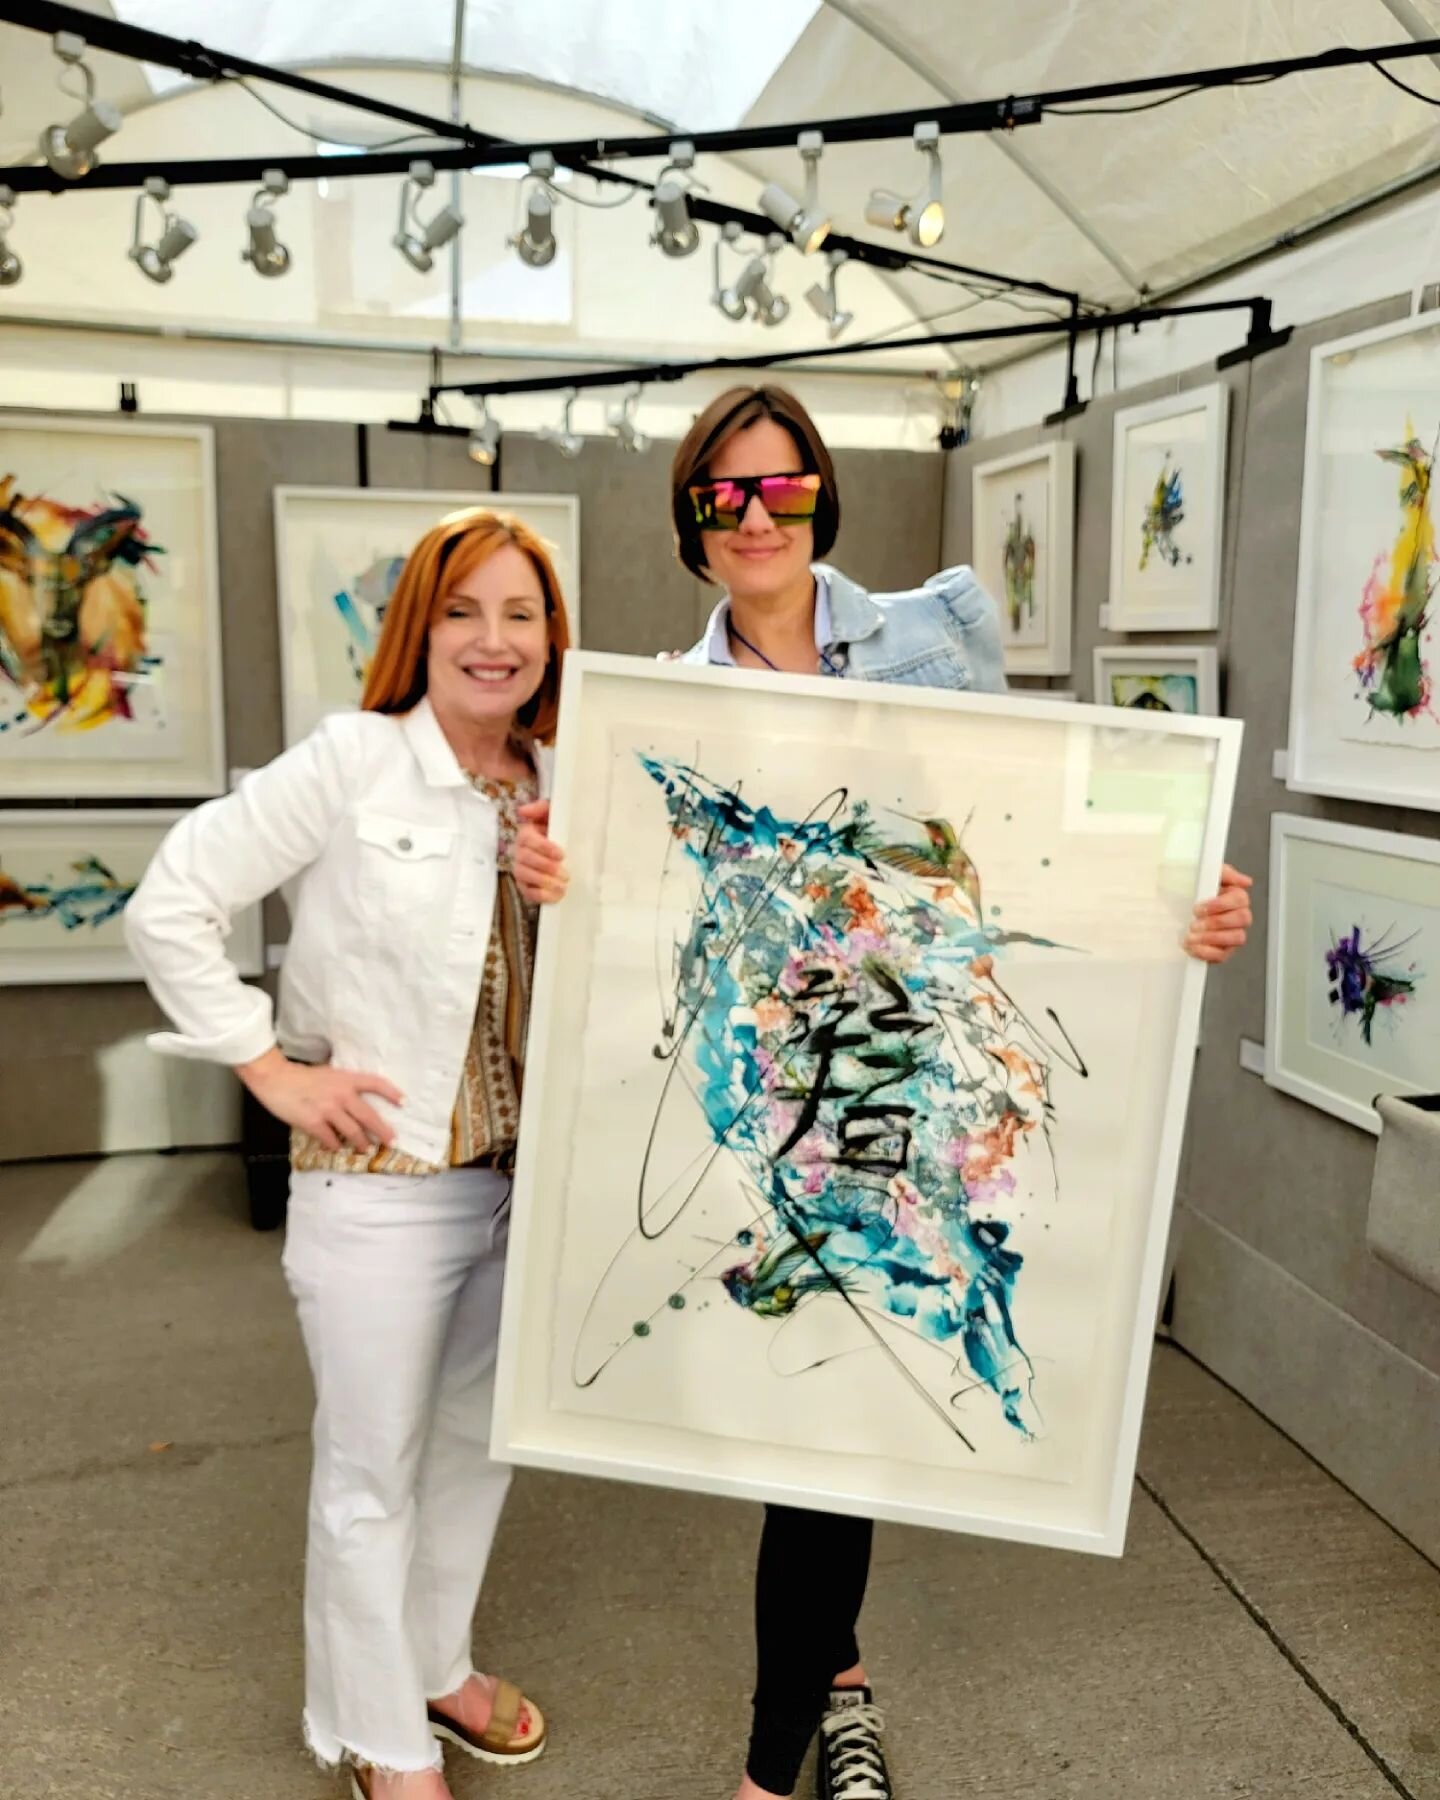 10 of the many wonderful moments from recent #artfestivals that proved to be incredible, fantastic, &amp; inspiring for so many reasons! Thank you, thank you, thank you to all that is above, around, &amp; beside me!!!!!! #iamgrateful 😍🎨🖼🥰 #artlif